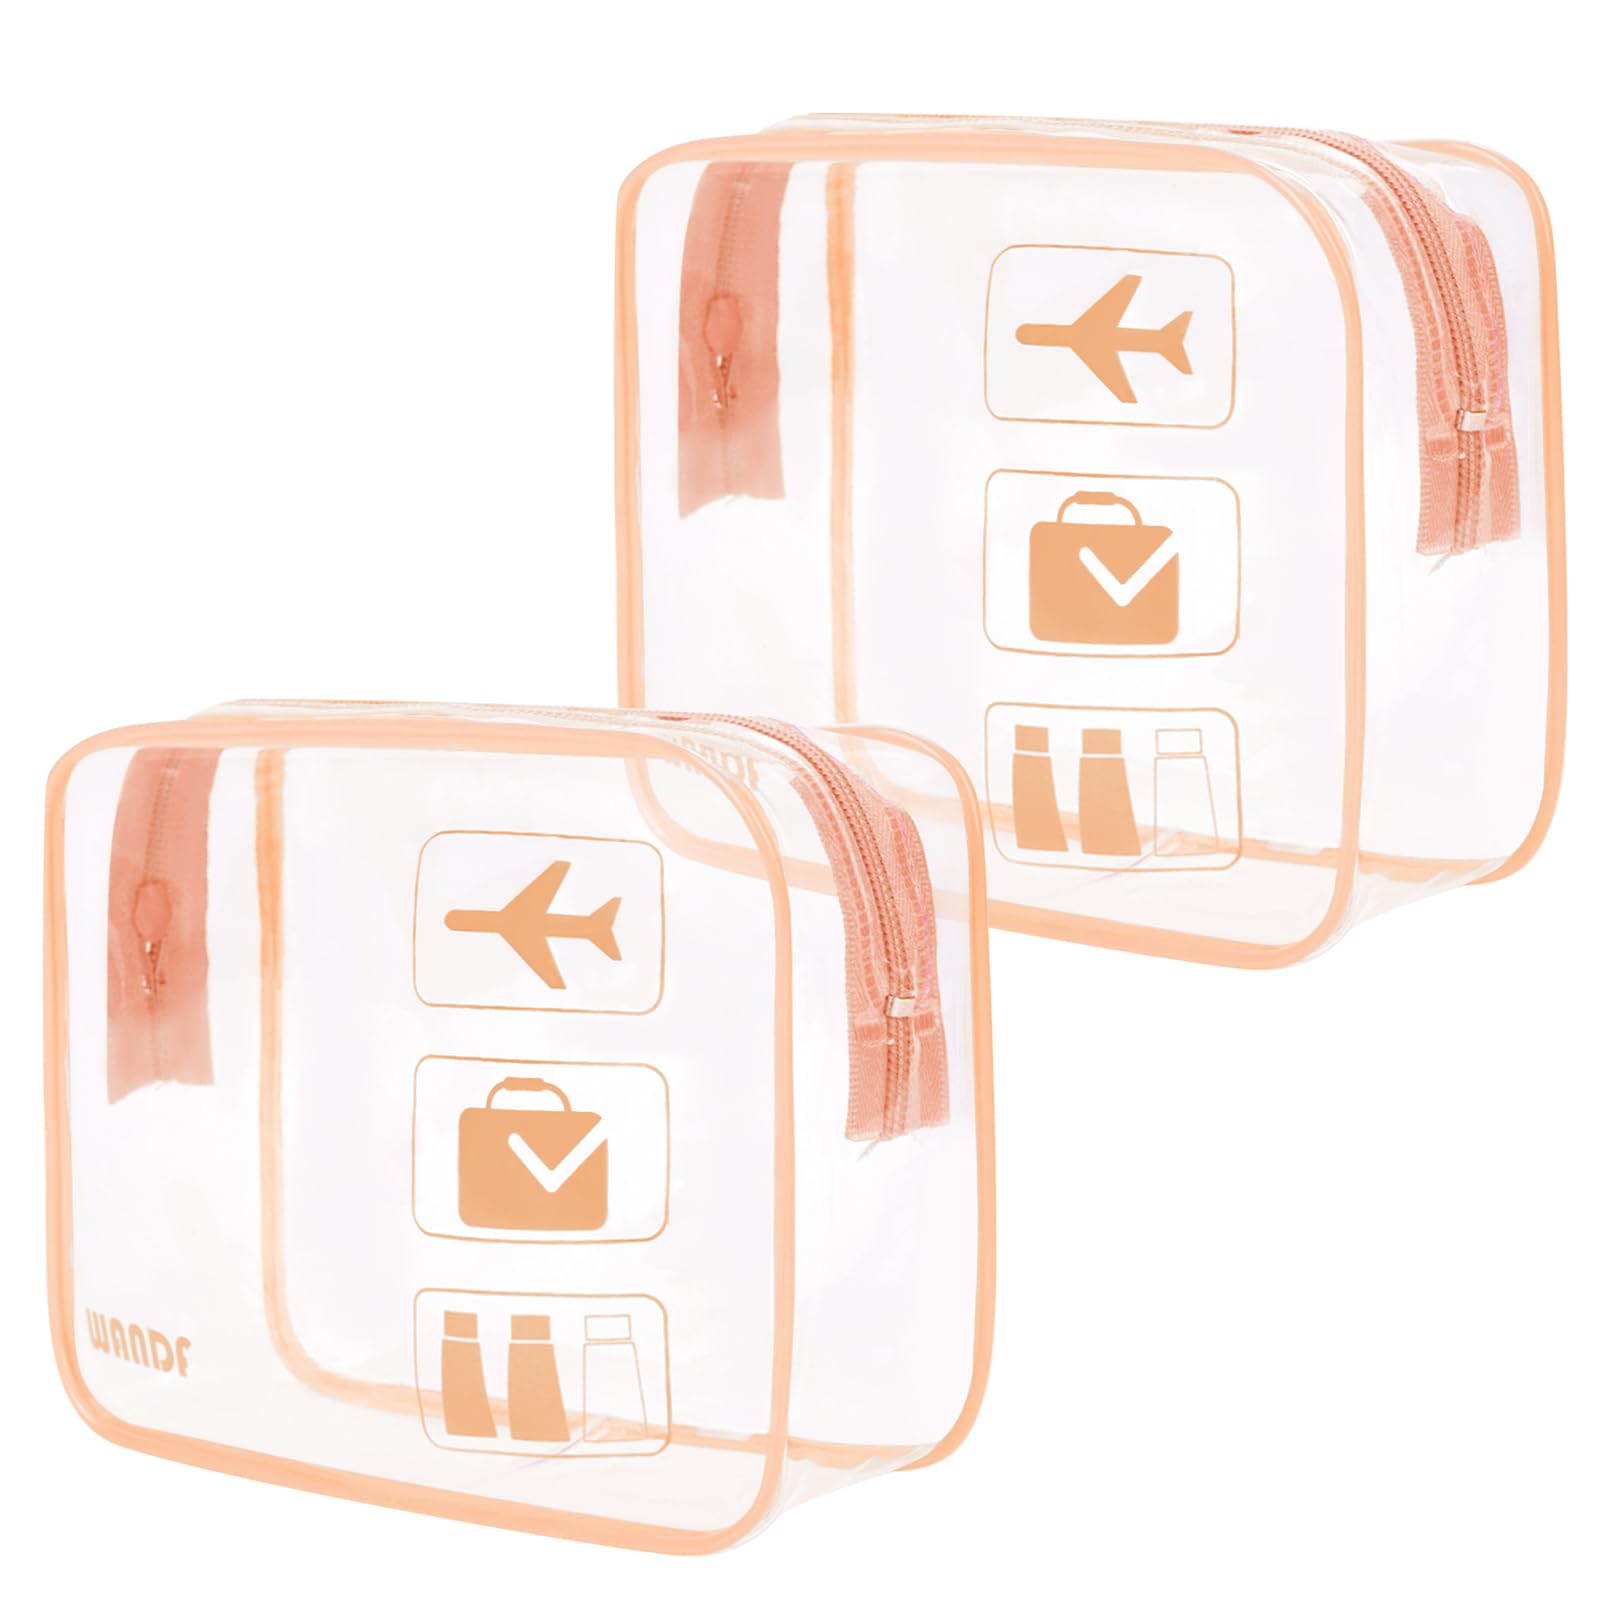 Does the TSA approve of these TSA approved toiletry bags sold on